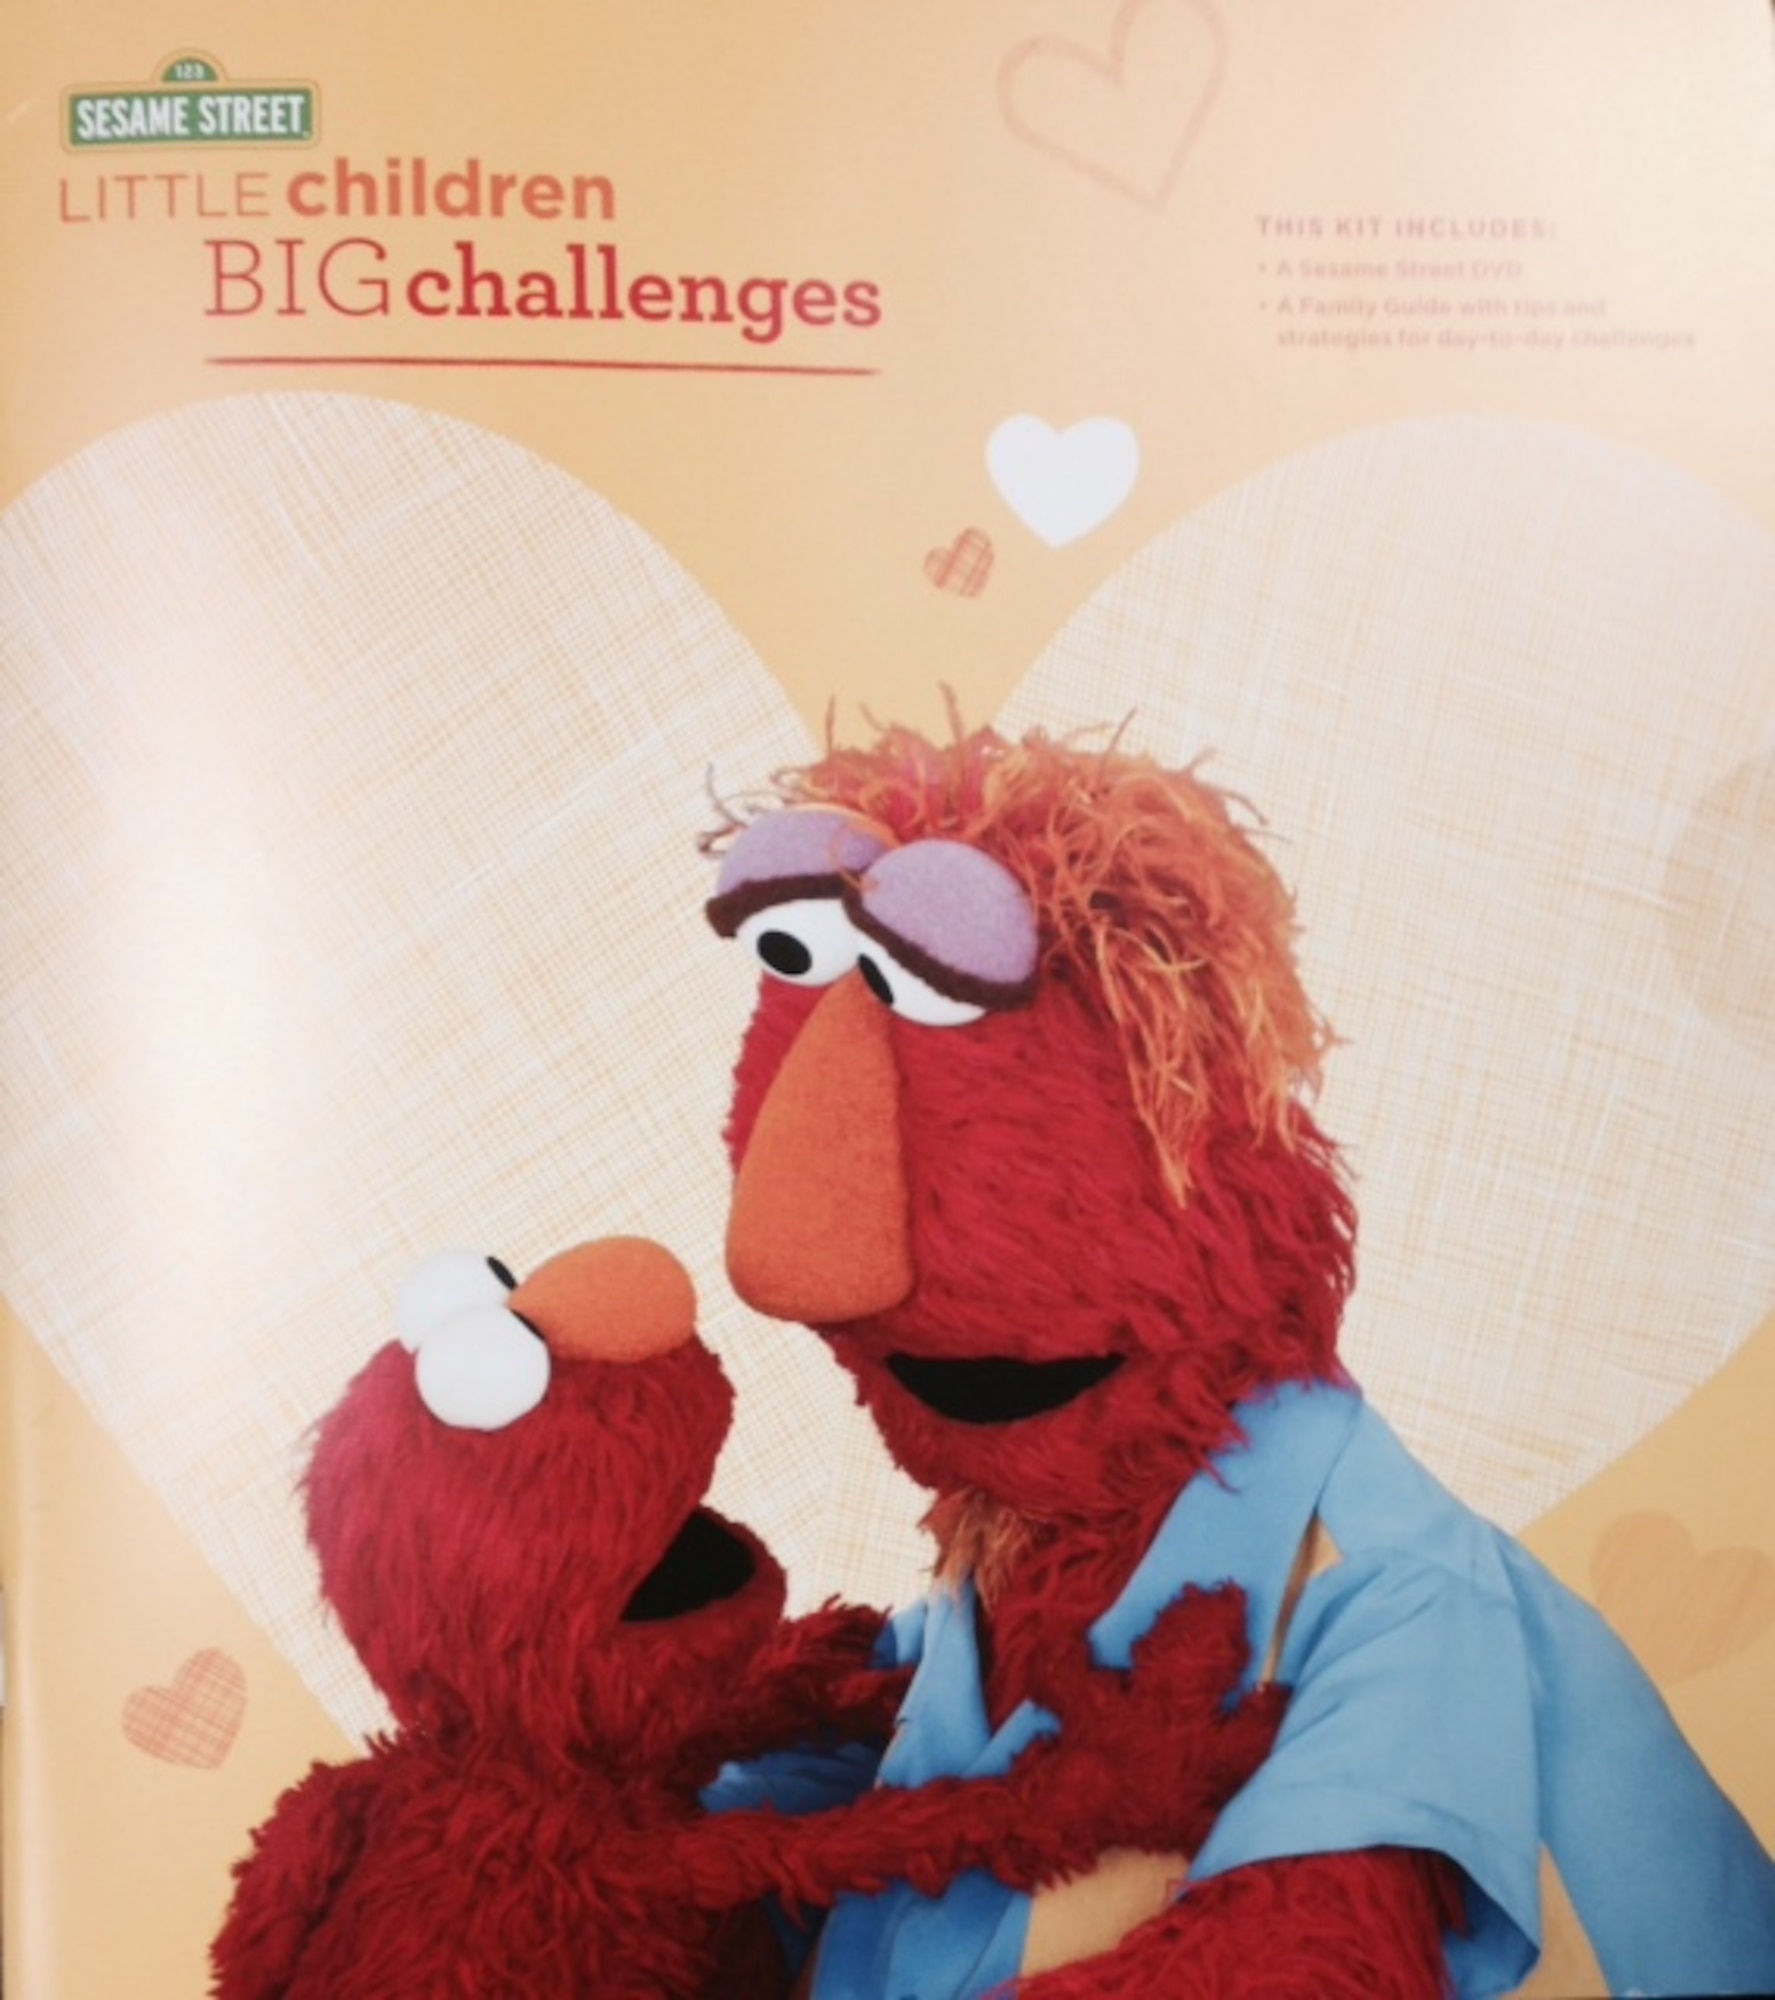 The Defense Department and Sesame Street have unveiled a book and DVD to develop resilience in young children. “Little Children, BIG Challenges” lets military children know that challenges are a part of life. Whether a child struggles with sitting quietly at the dinner table, or faces a bully at school, the beloved Sesame Street characters can help.